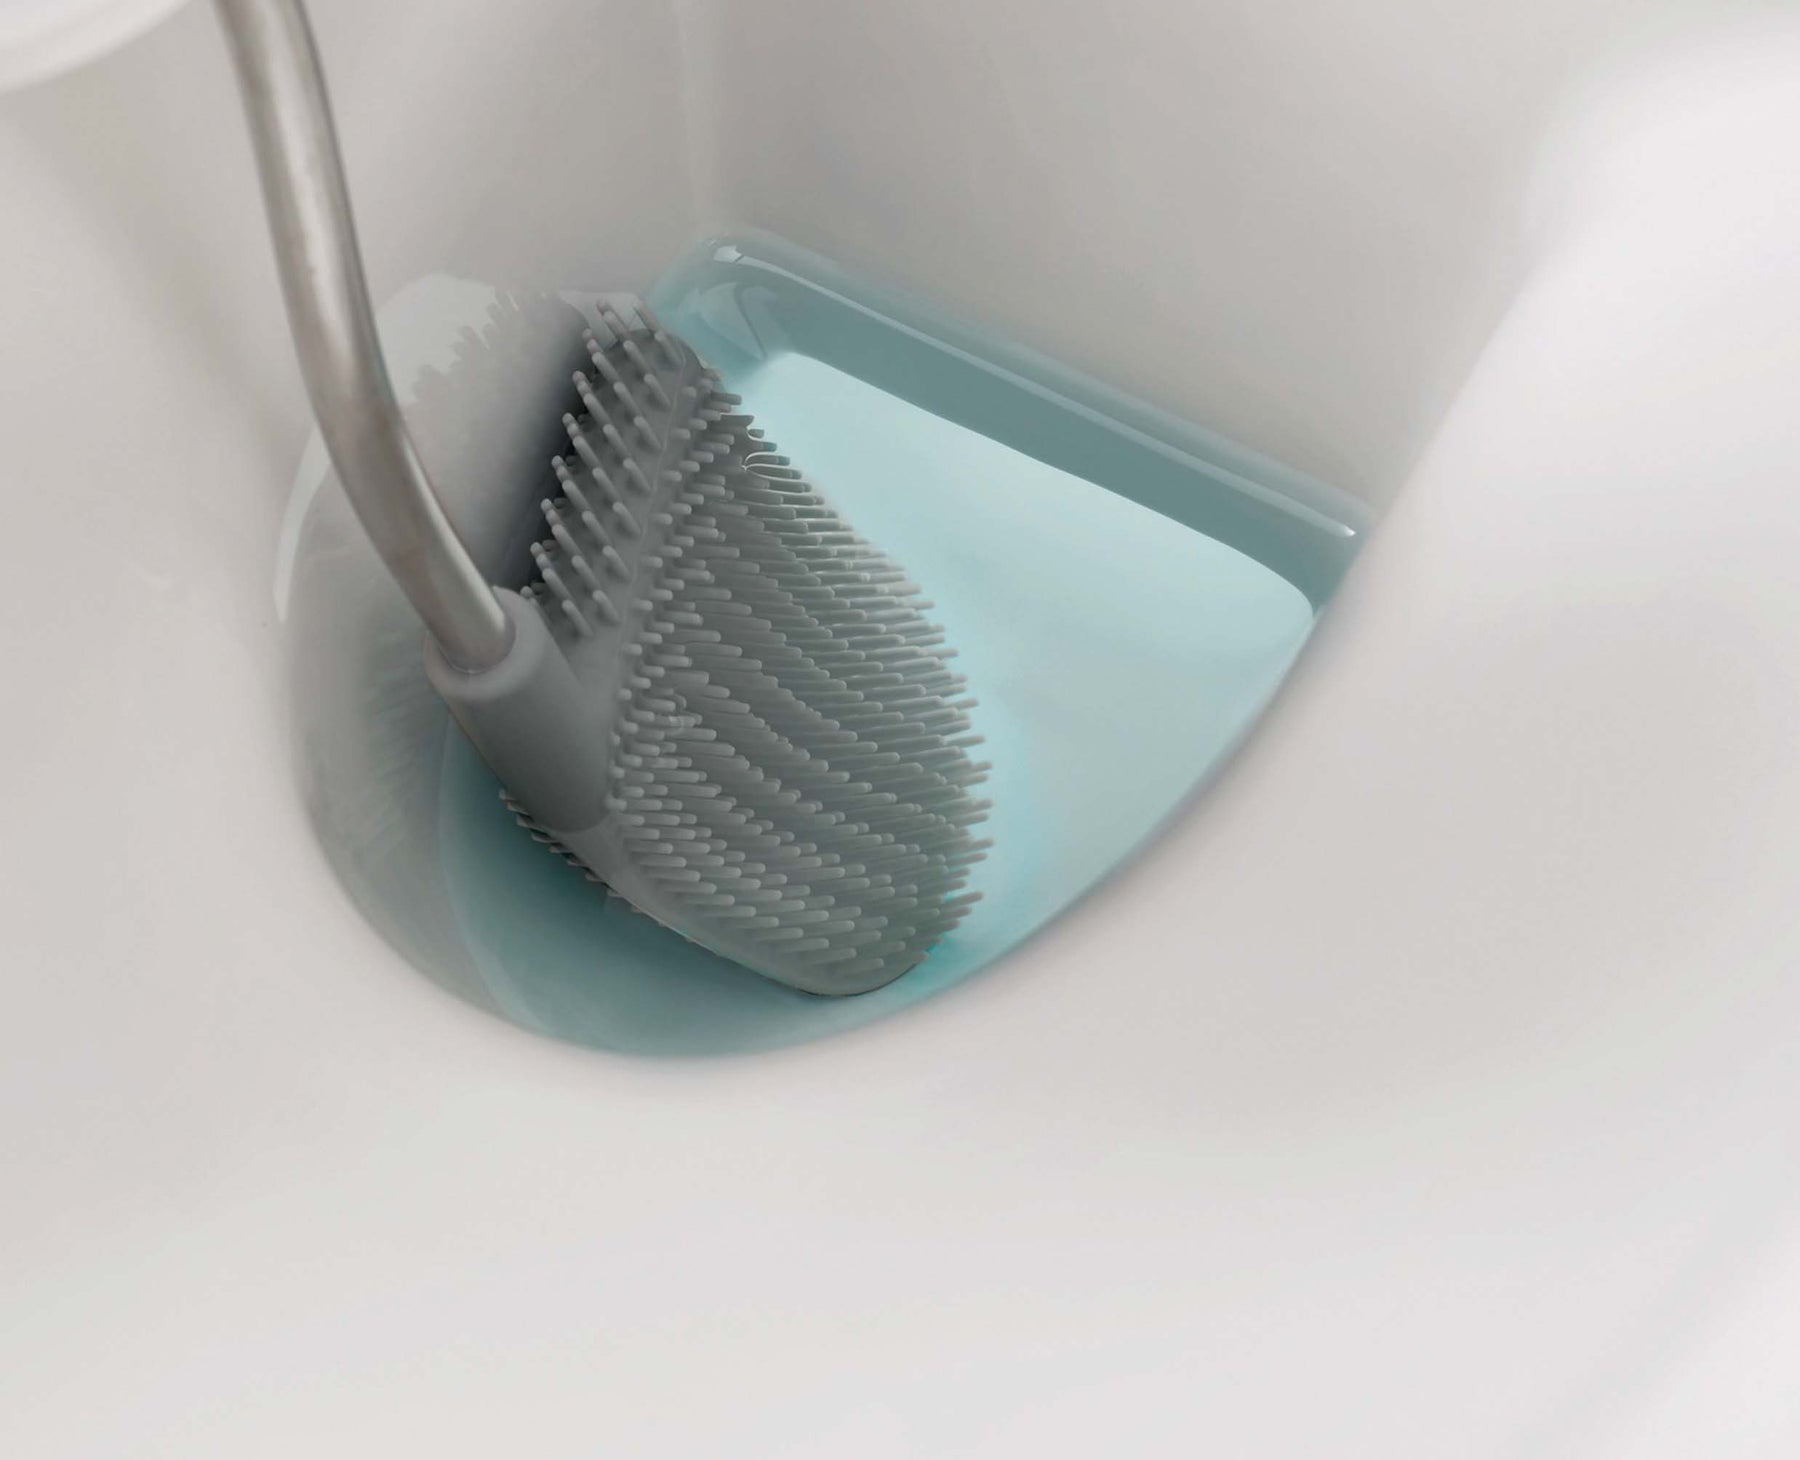 Flex™ 360 Luxe Toilet Brush with Stainless-steel Finish